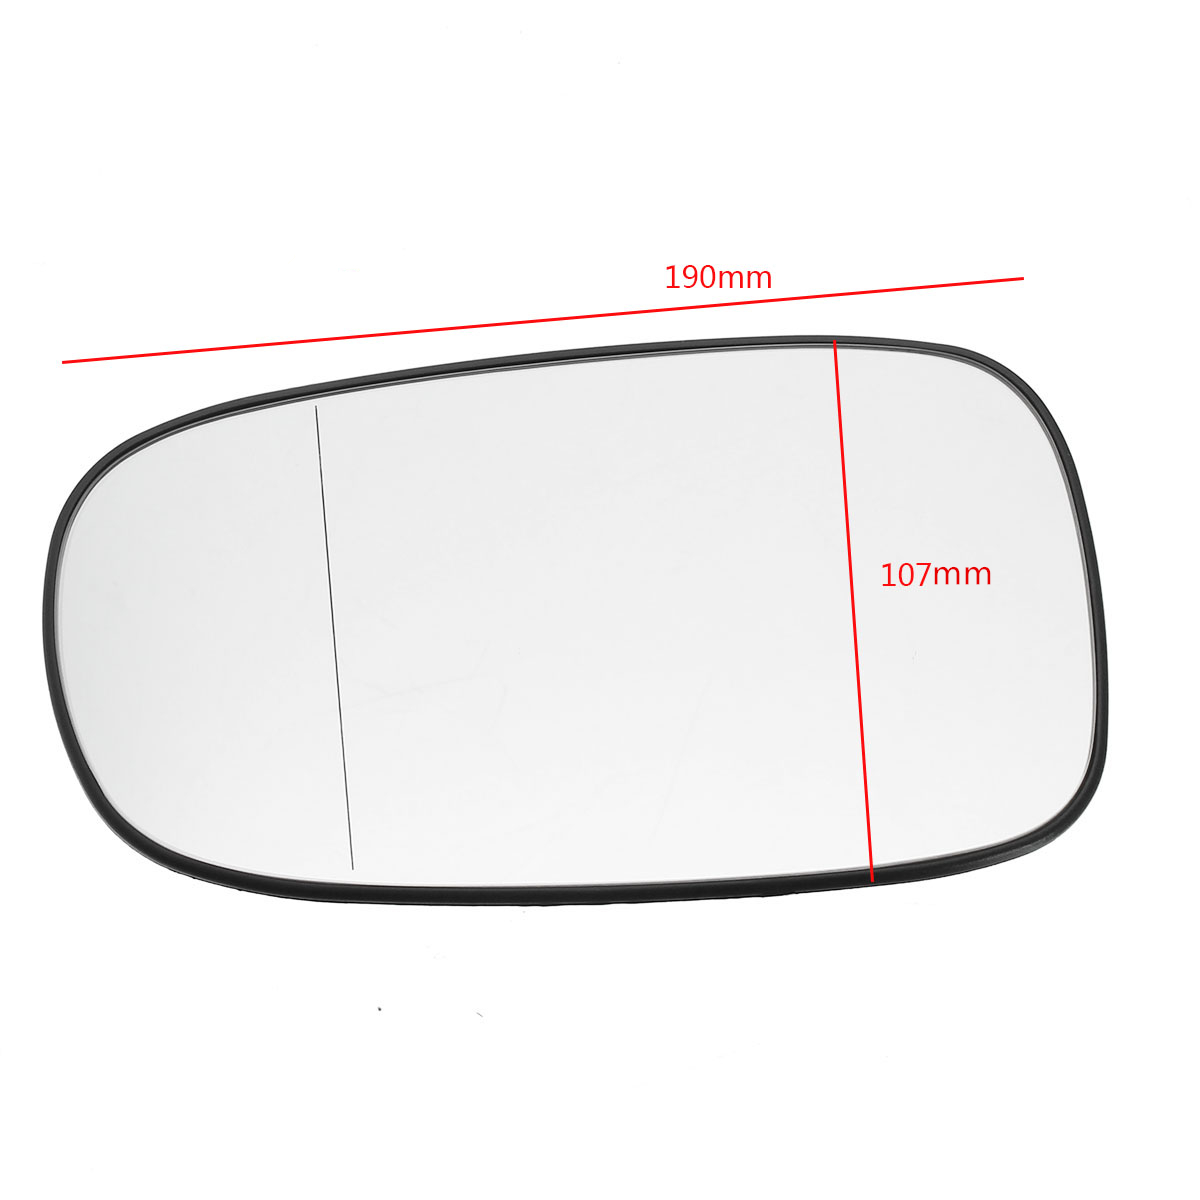 Car-Right-Side-Door-Wing-Mirrors-Glass-Wide-Angle-For-SAAB-9-3-93-2003-2010-1135444